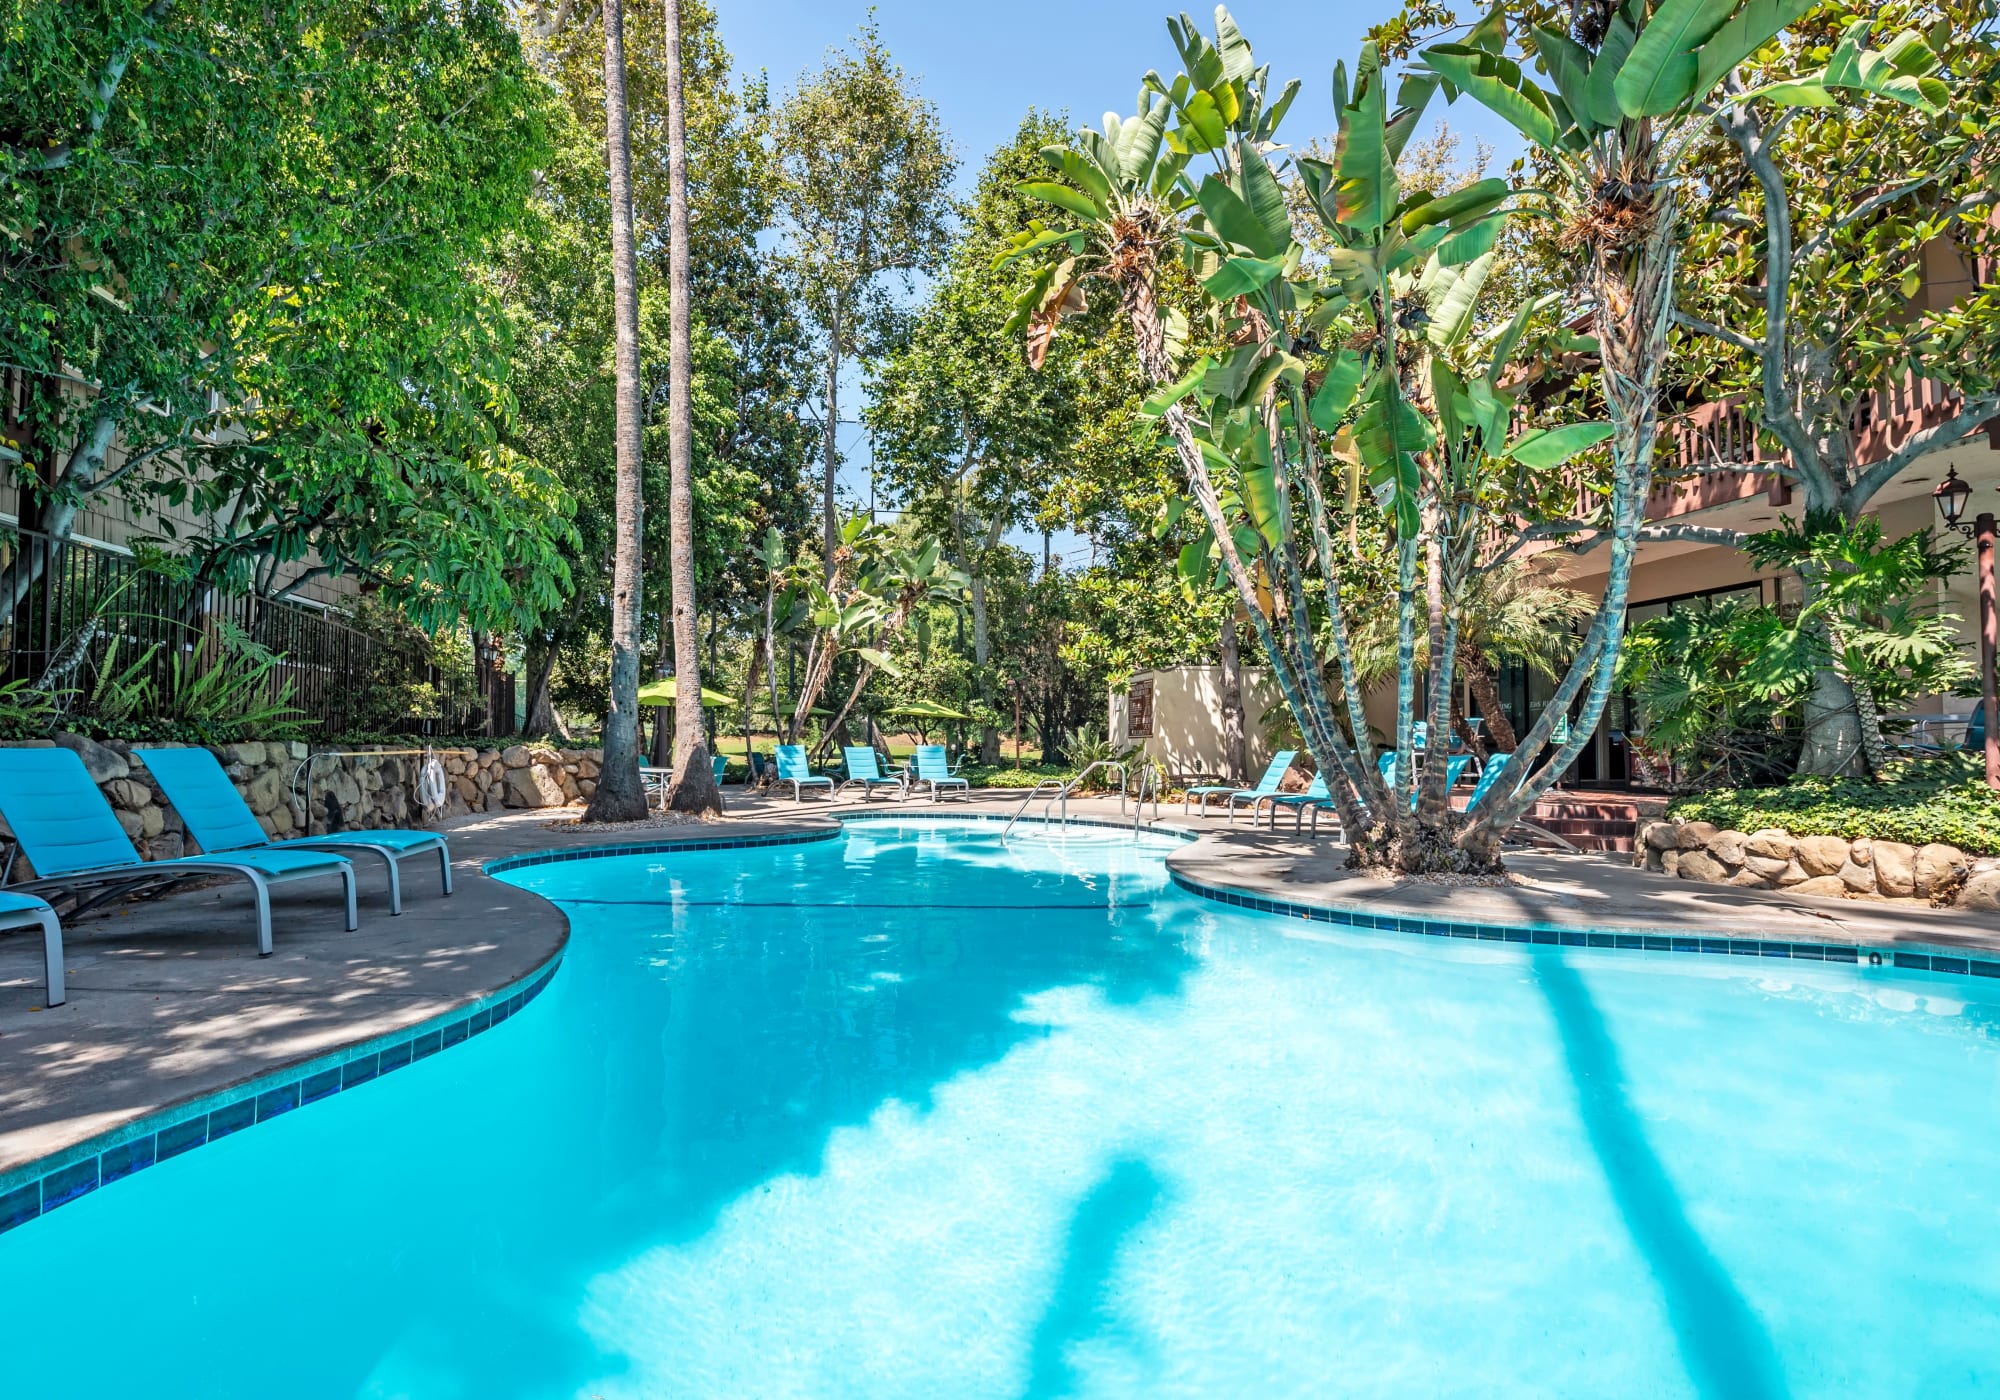 Resort-style swimming pool surrounded by mature trees at Rancho Los Feliz in Los Angeles, California